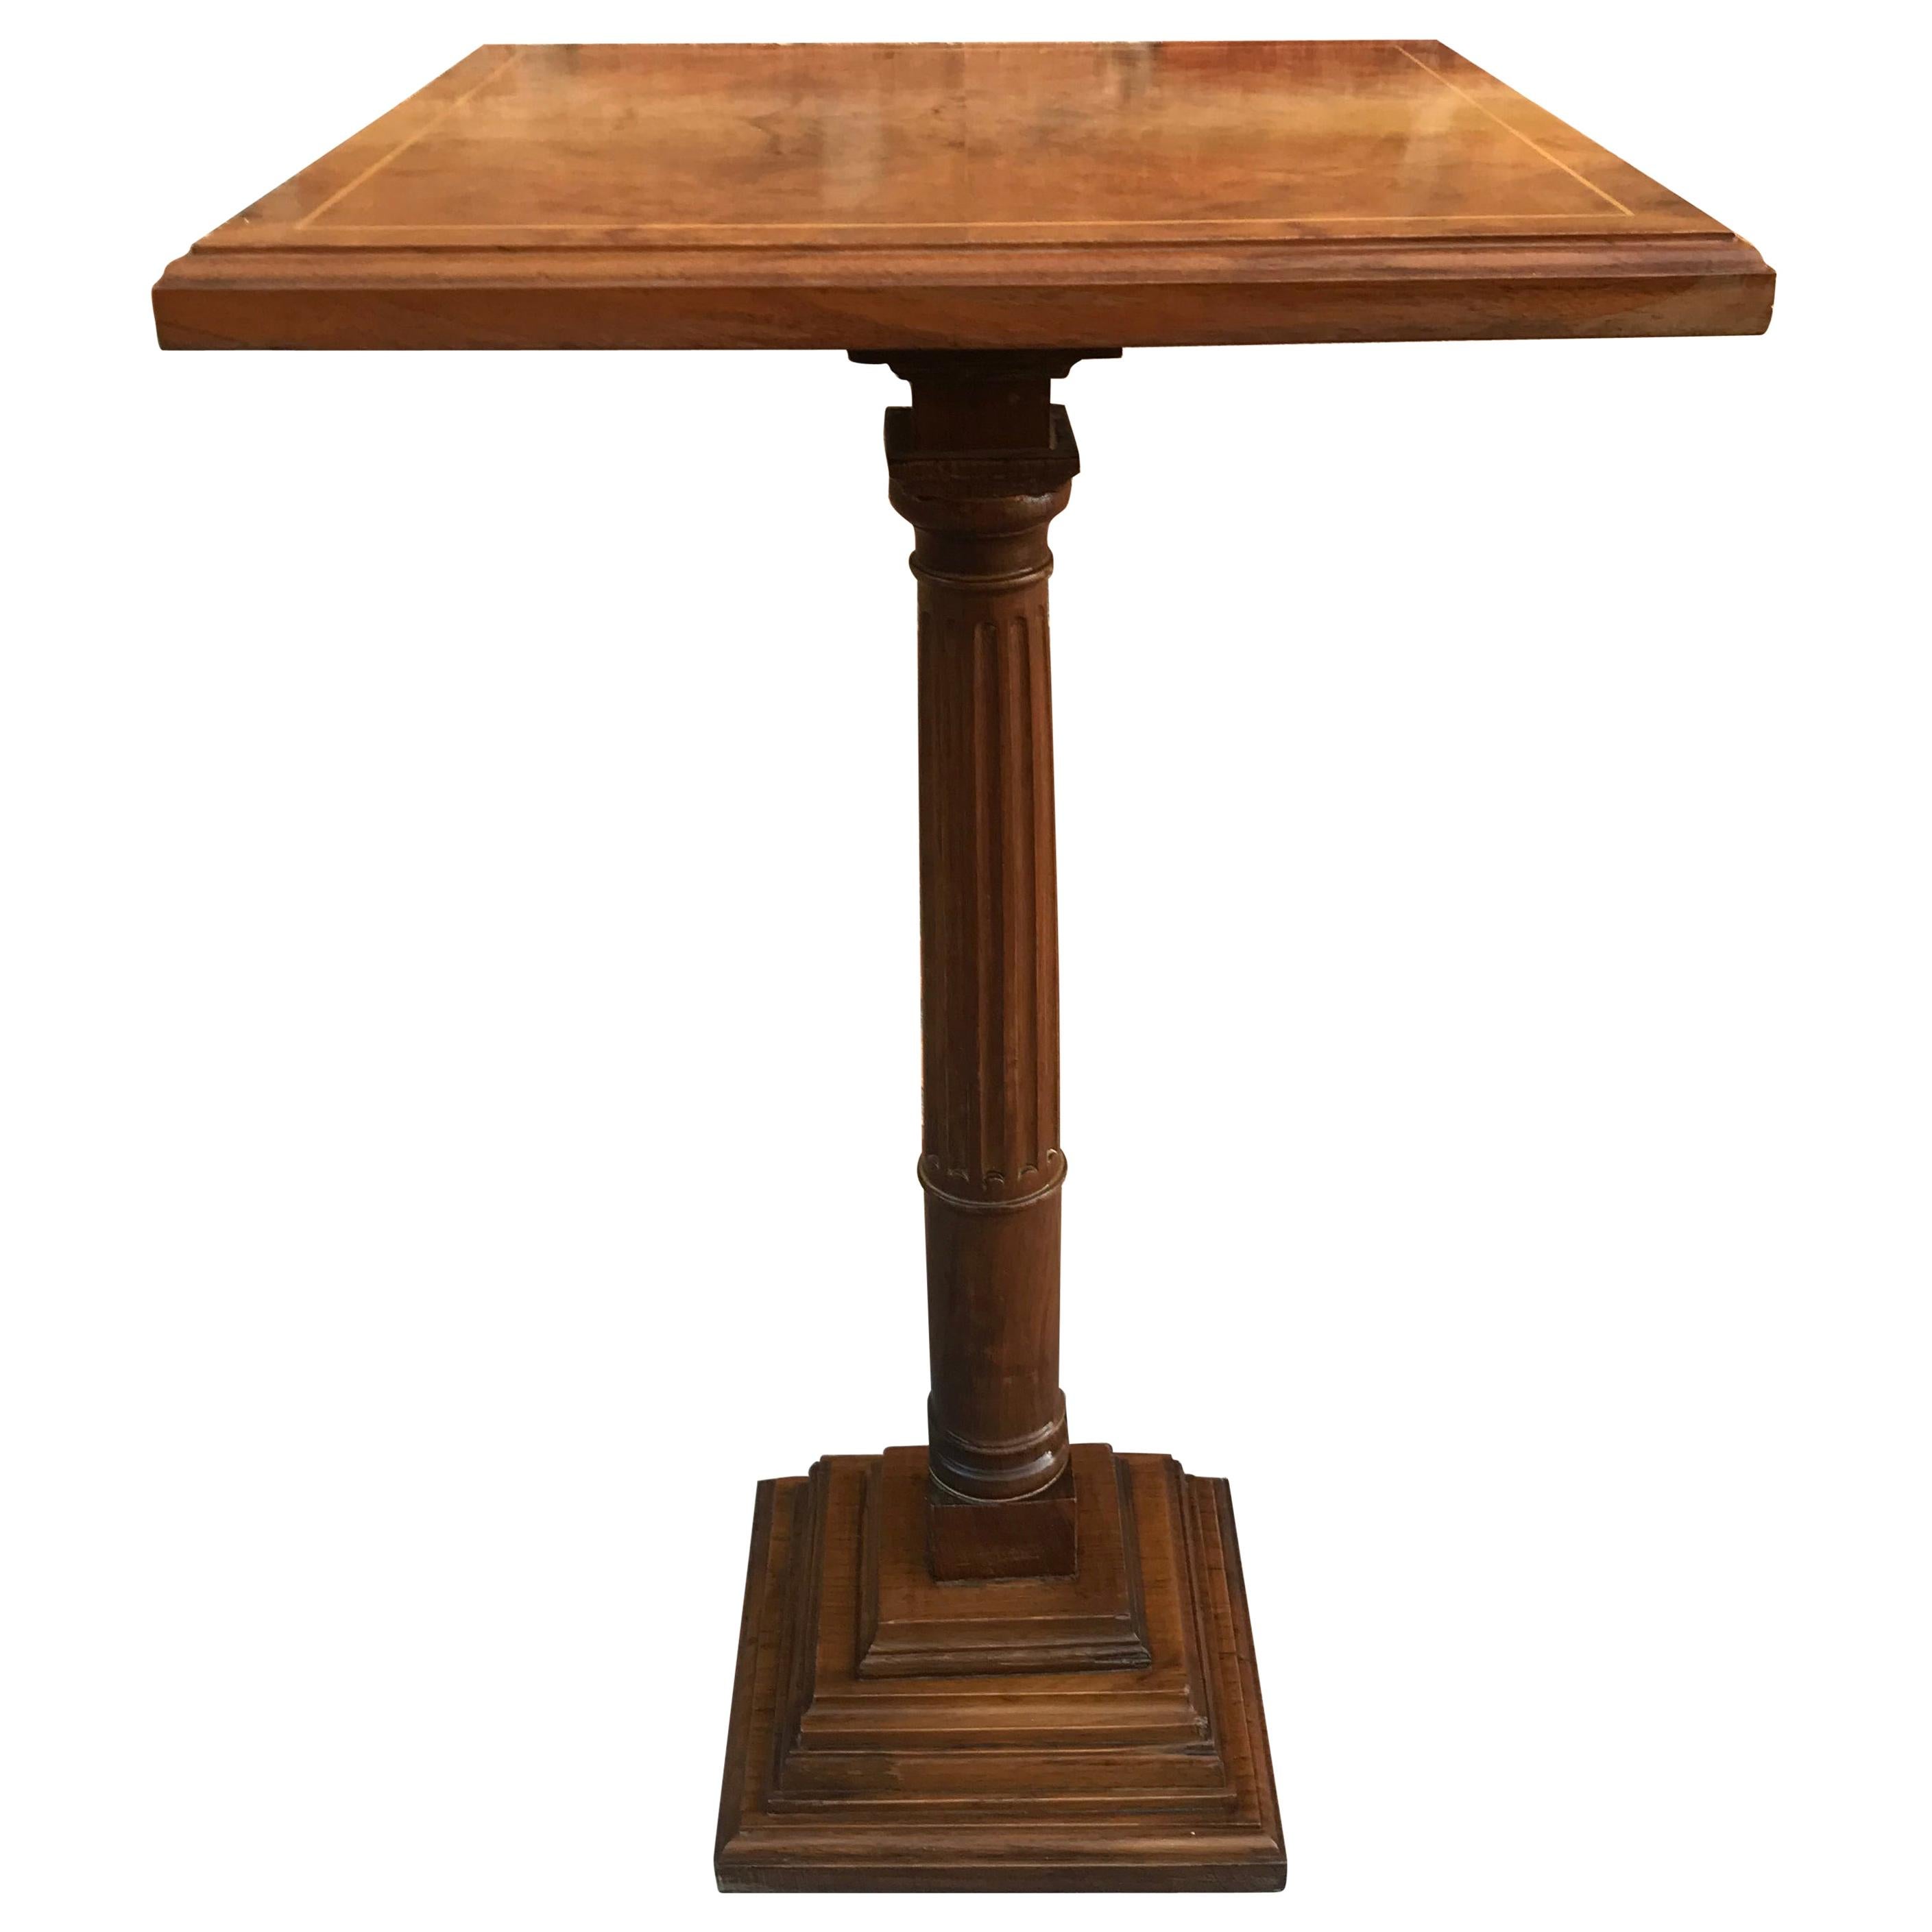 Mid-20th Century Walnut Wood Square Top Pedestal Table For Sale